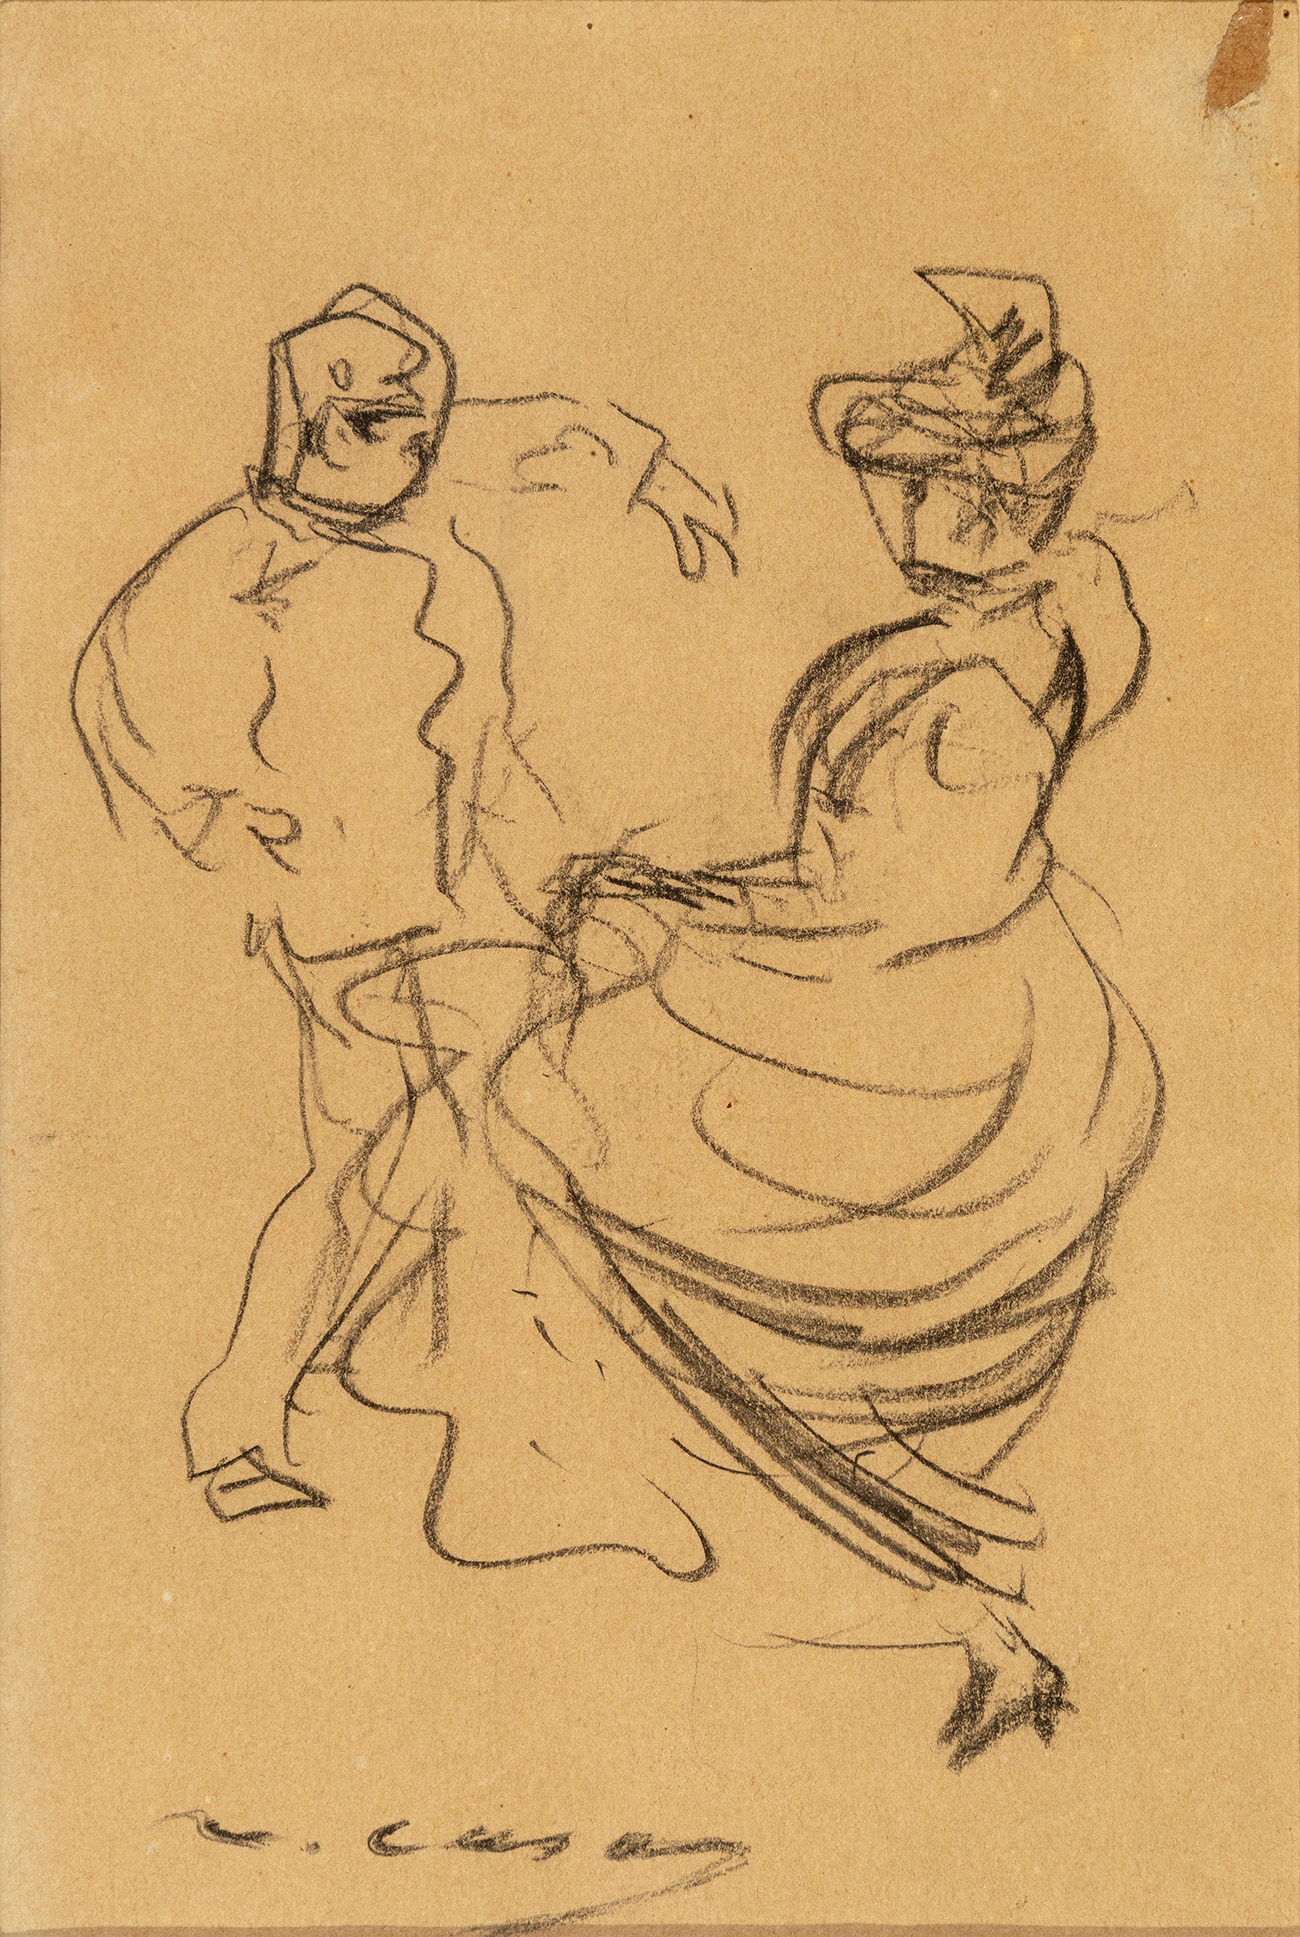 RAMON CASAS CARBÓ (Barcelona, 1866 - 1932)."Couple dancing".Charcoal drawing on paper.Signed at